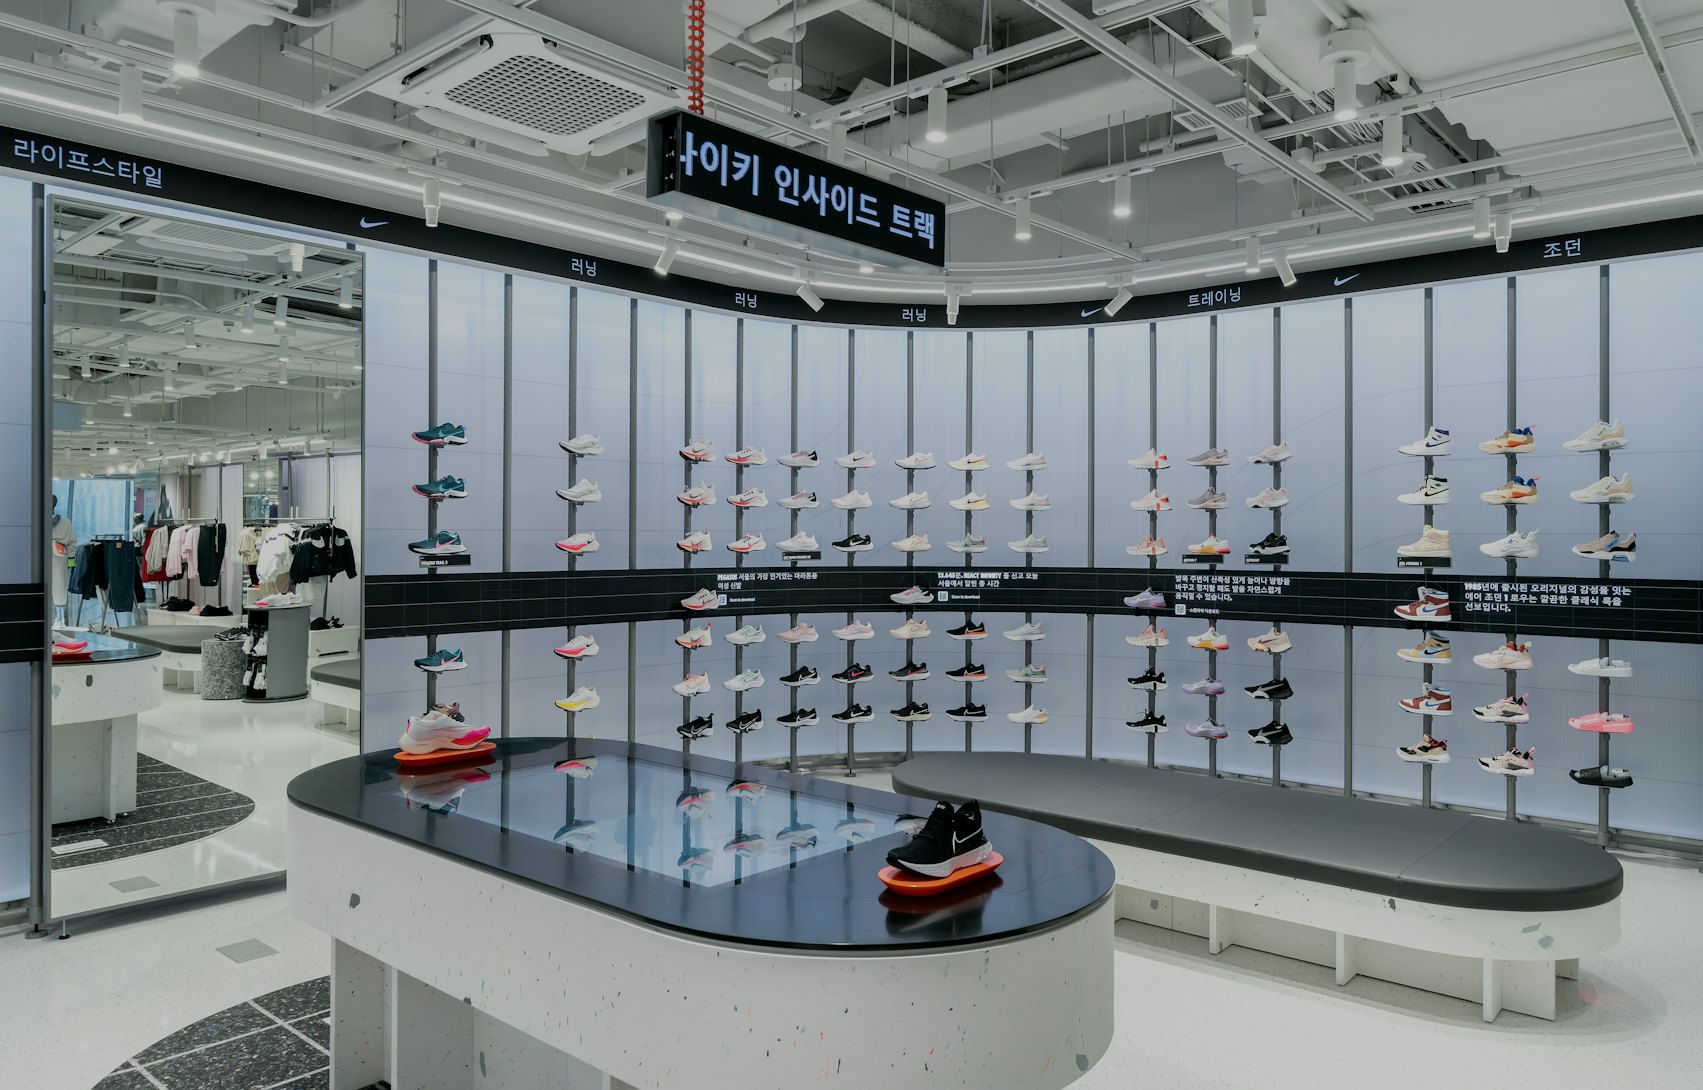 Nike's new 'Rise' store is a wild, high-tech shopping experience